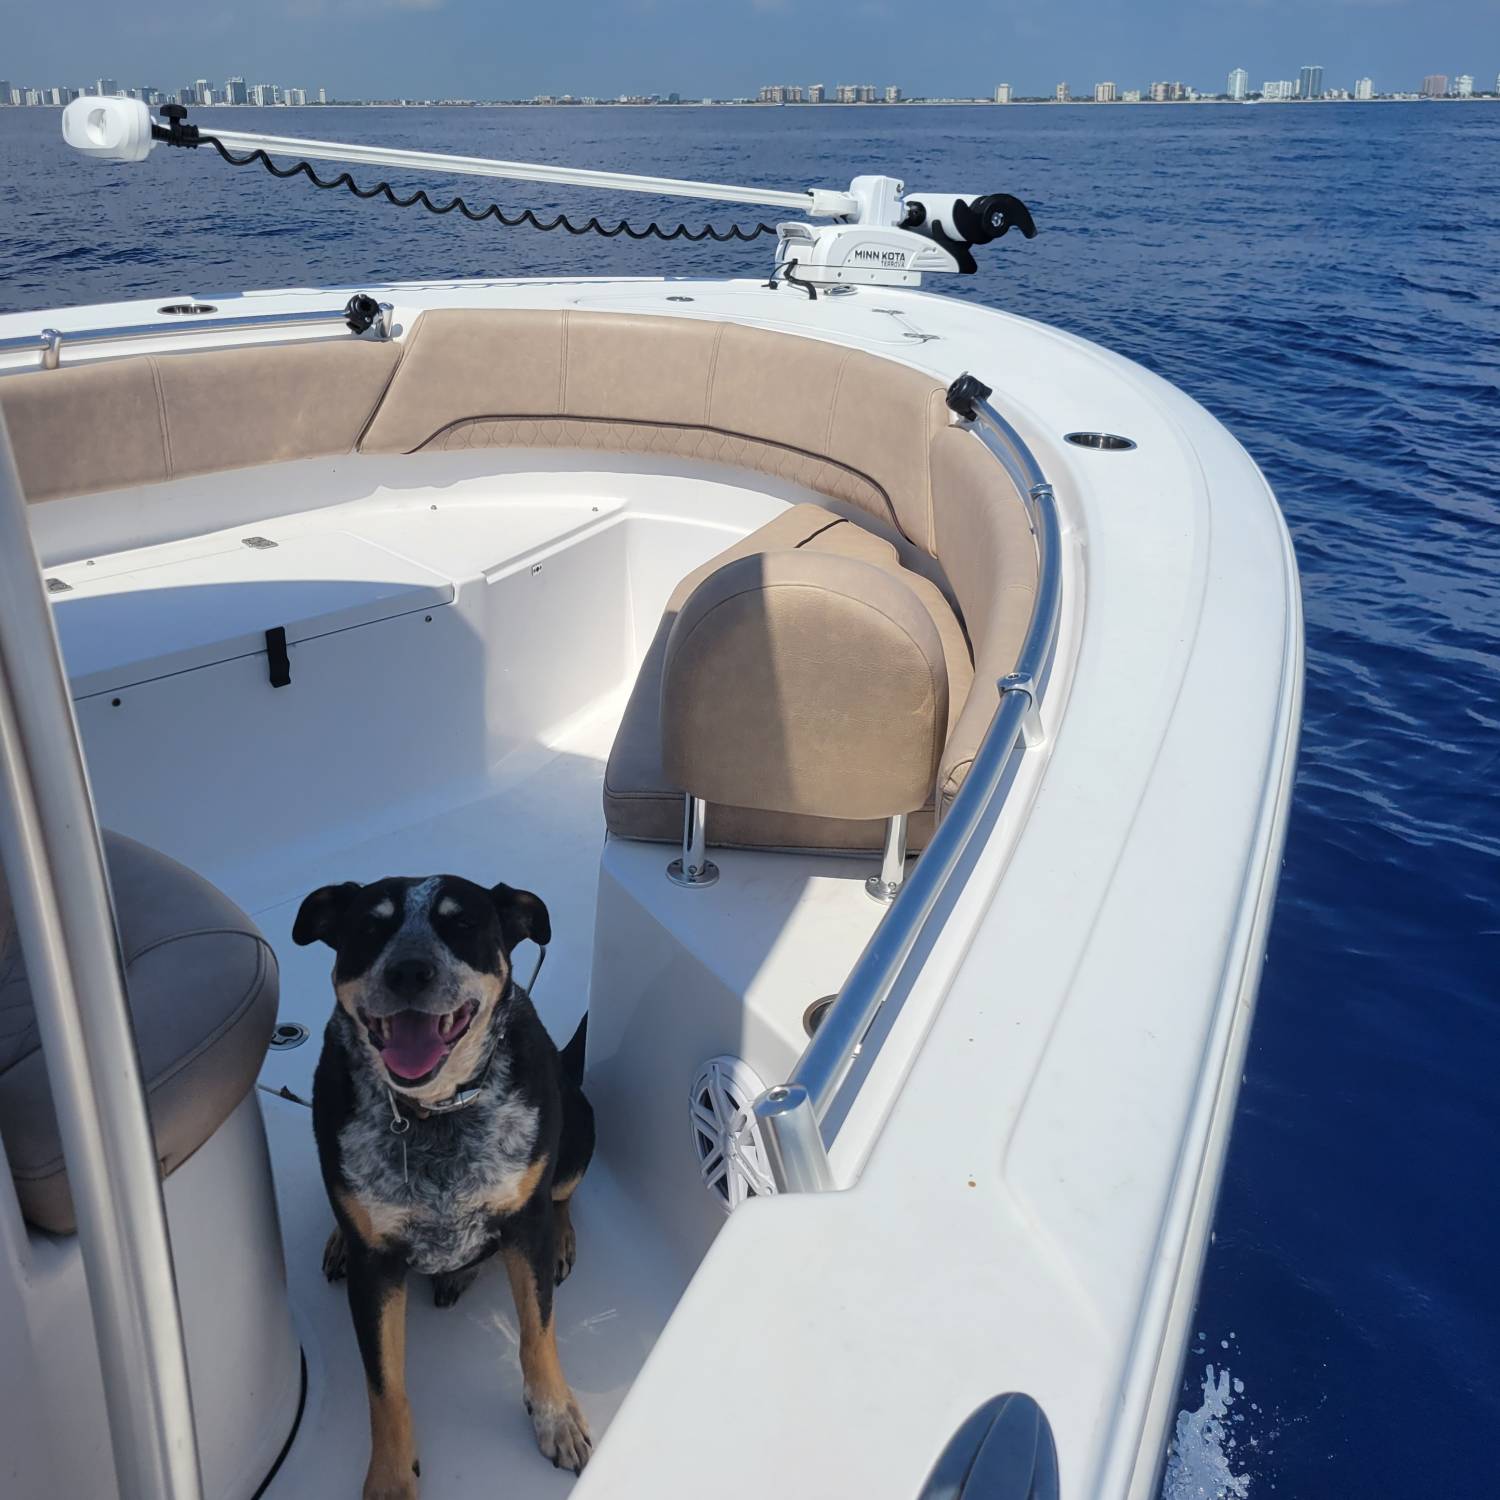 Title: Ace on the 232 - On board their Sportsman Open 232 Center Console - Location: Pompano Beach, FL. Participating in the Photo Contest #SportsmanSeptember